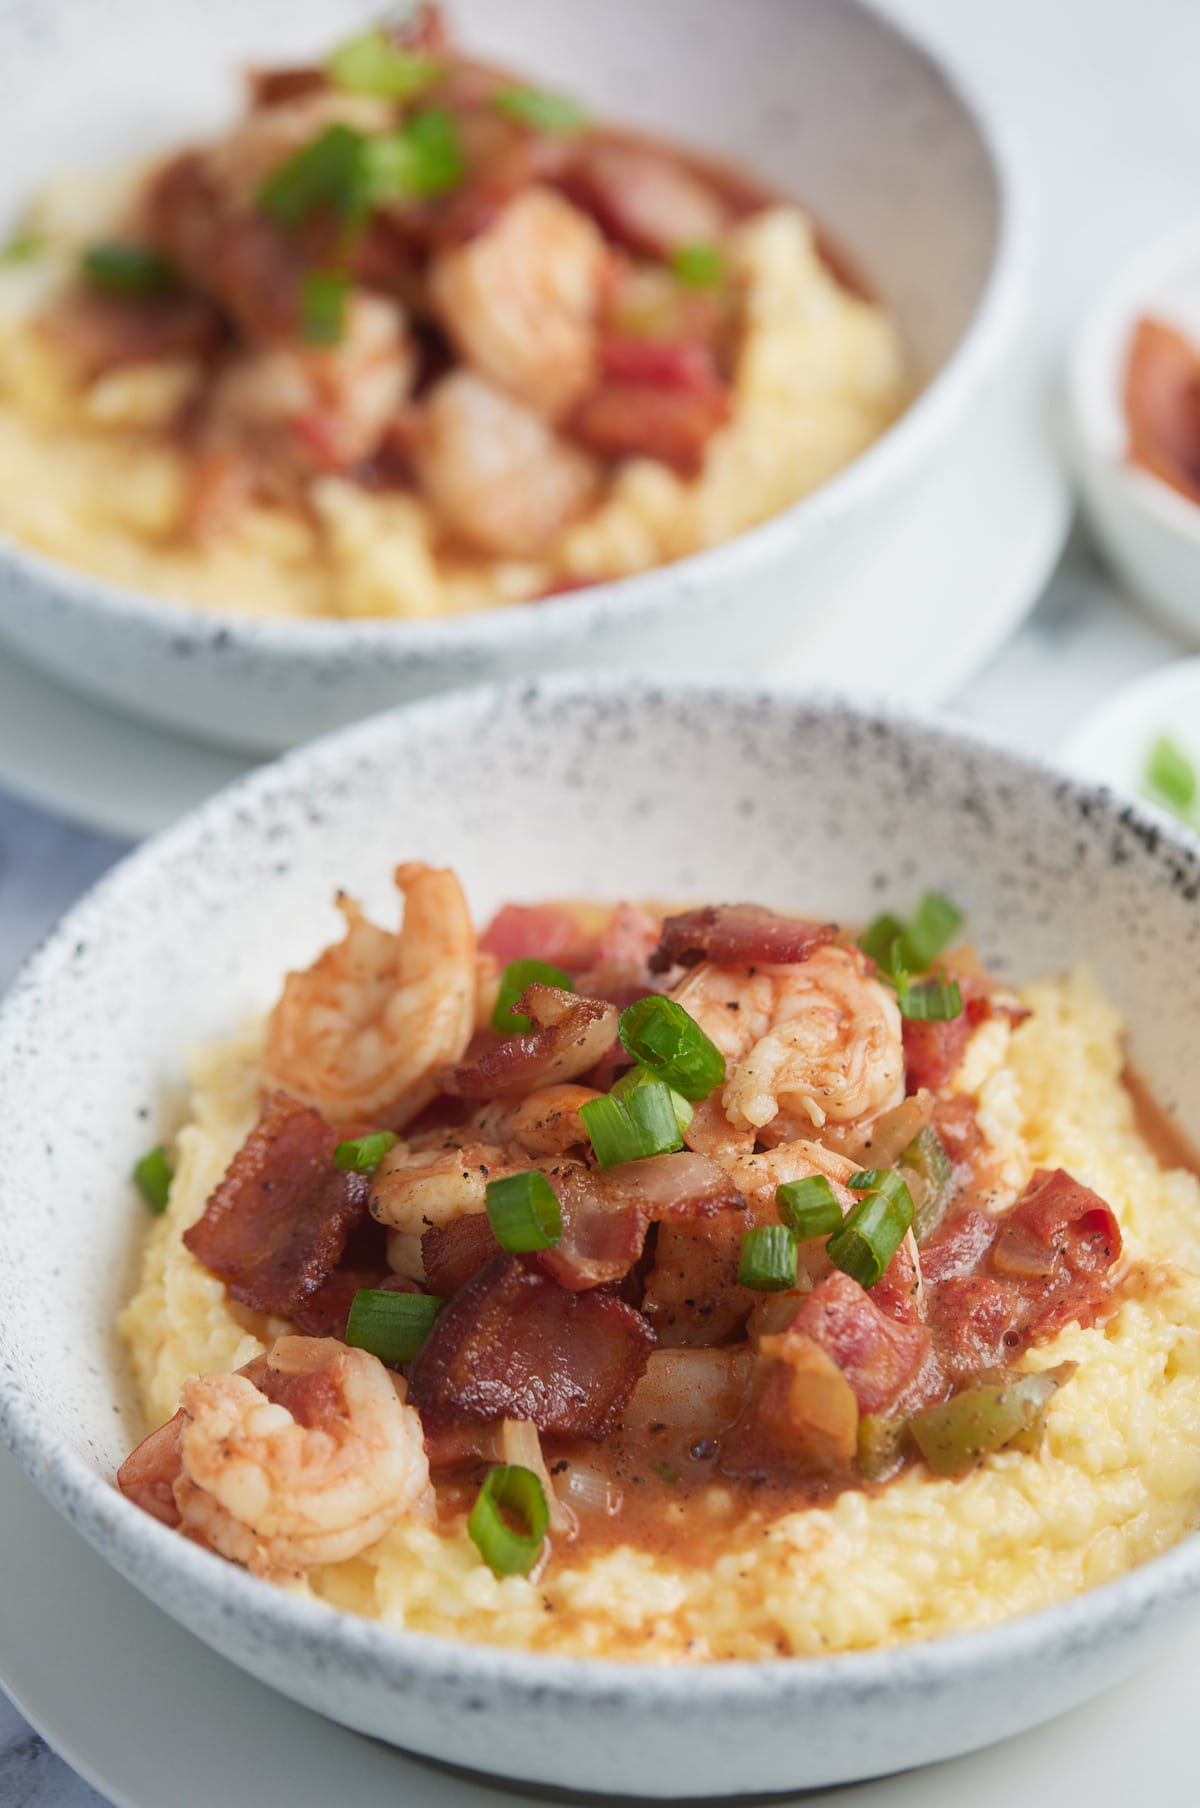 Tow bowls of Southern style shrimp and grits.